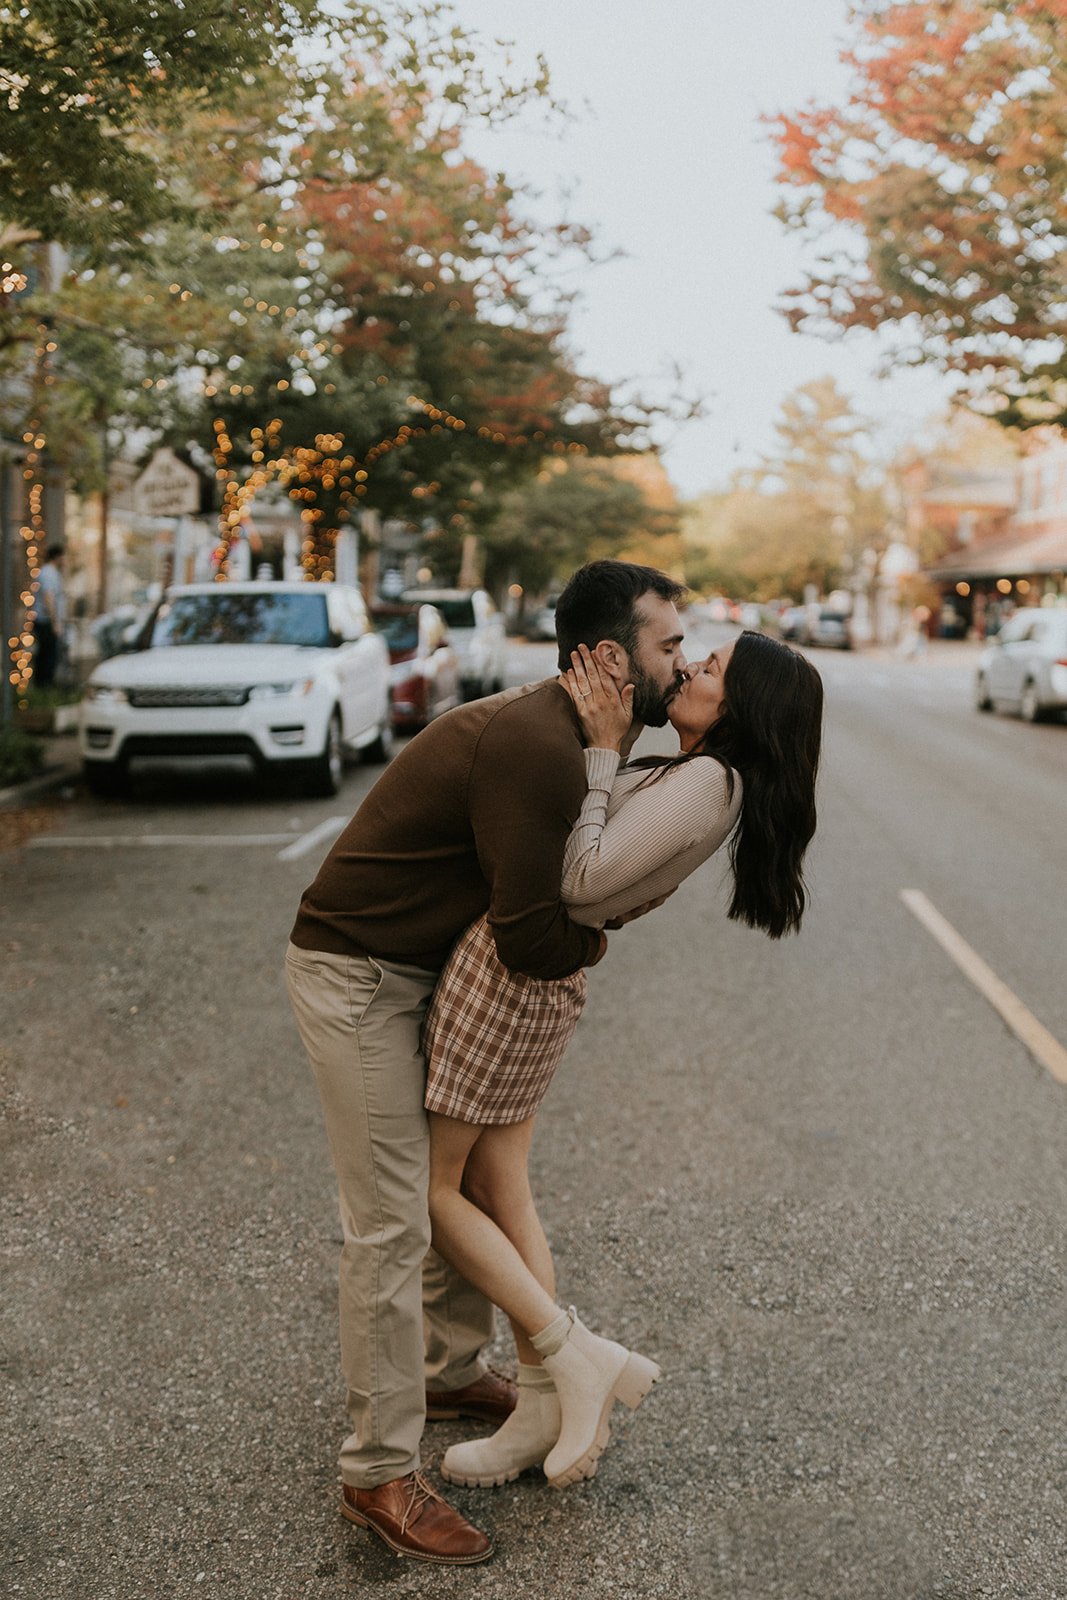  Couple kisses in the street. 